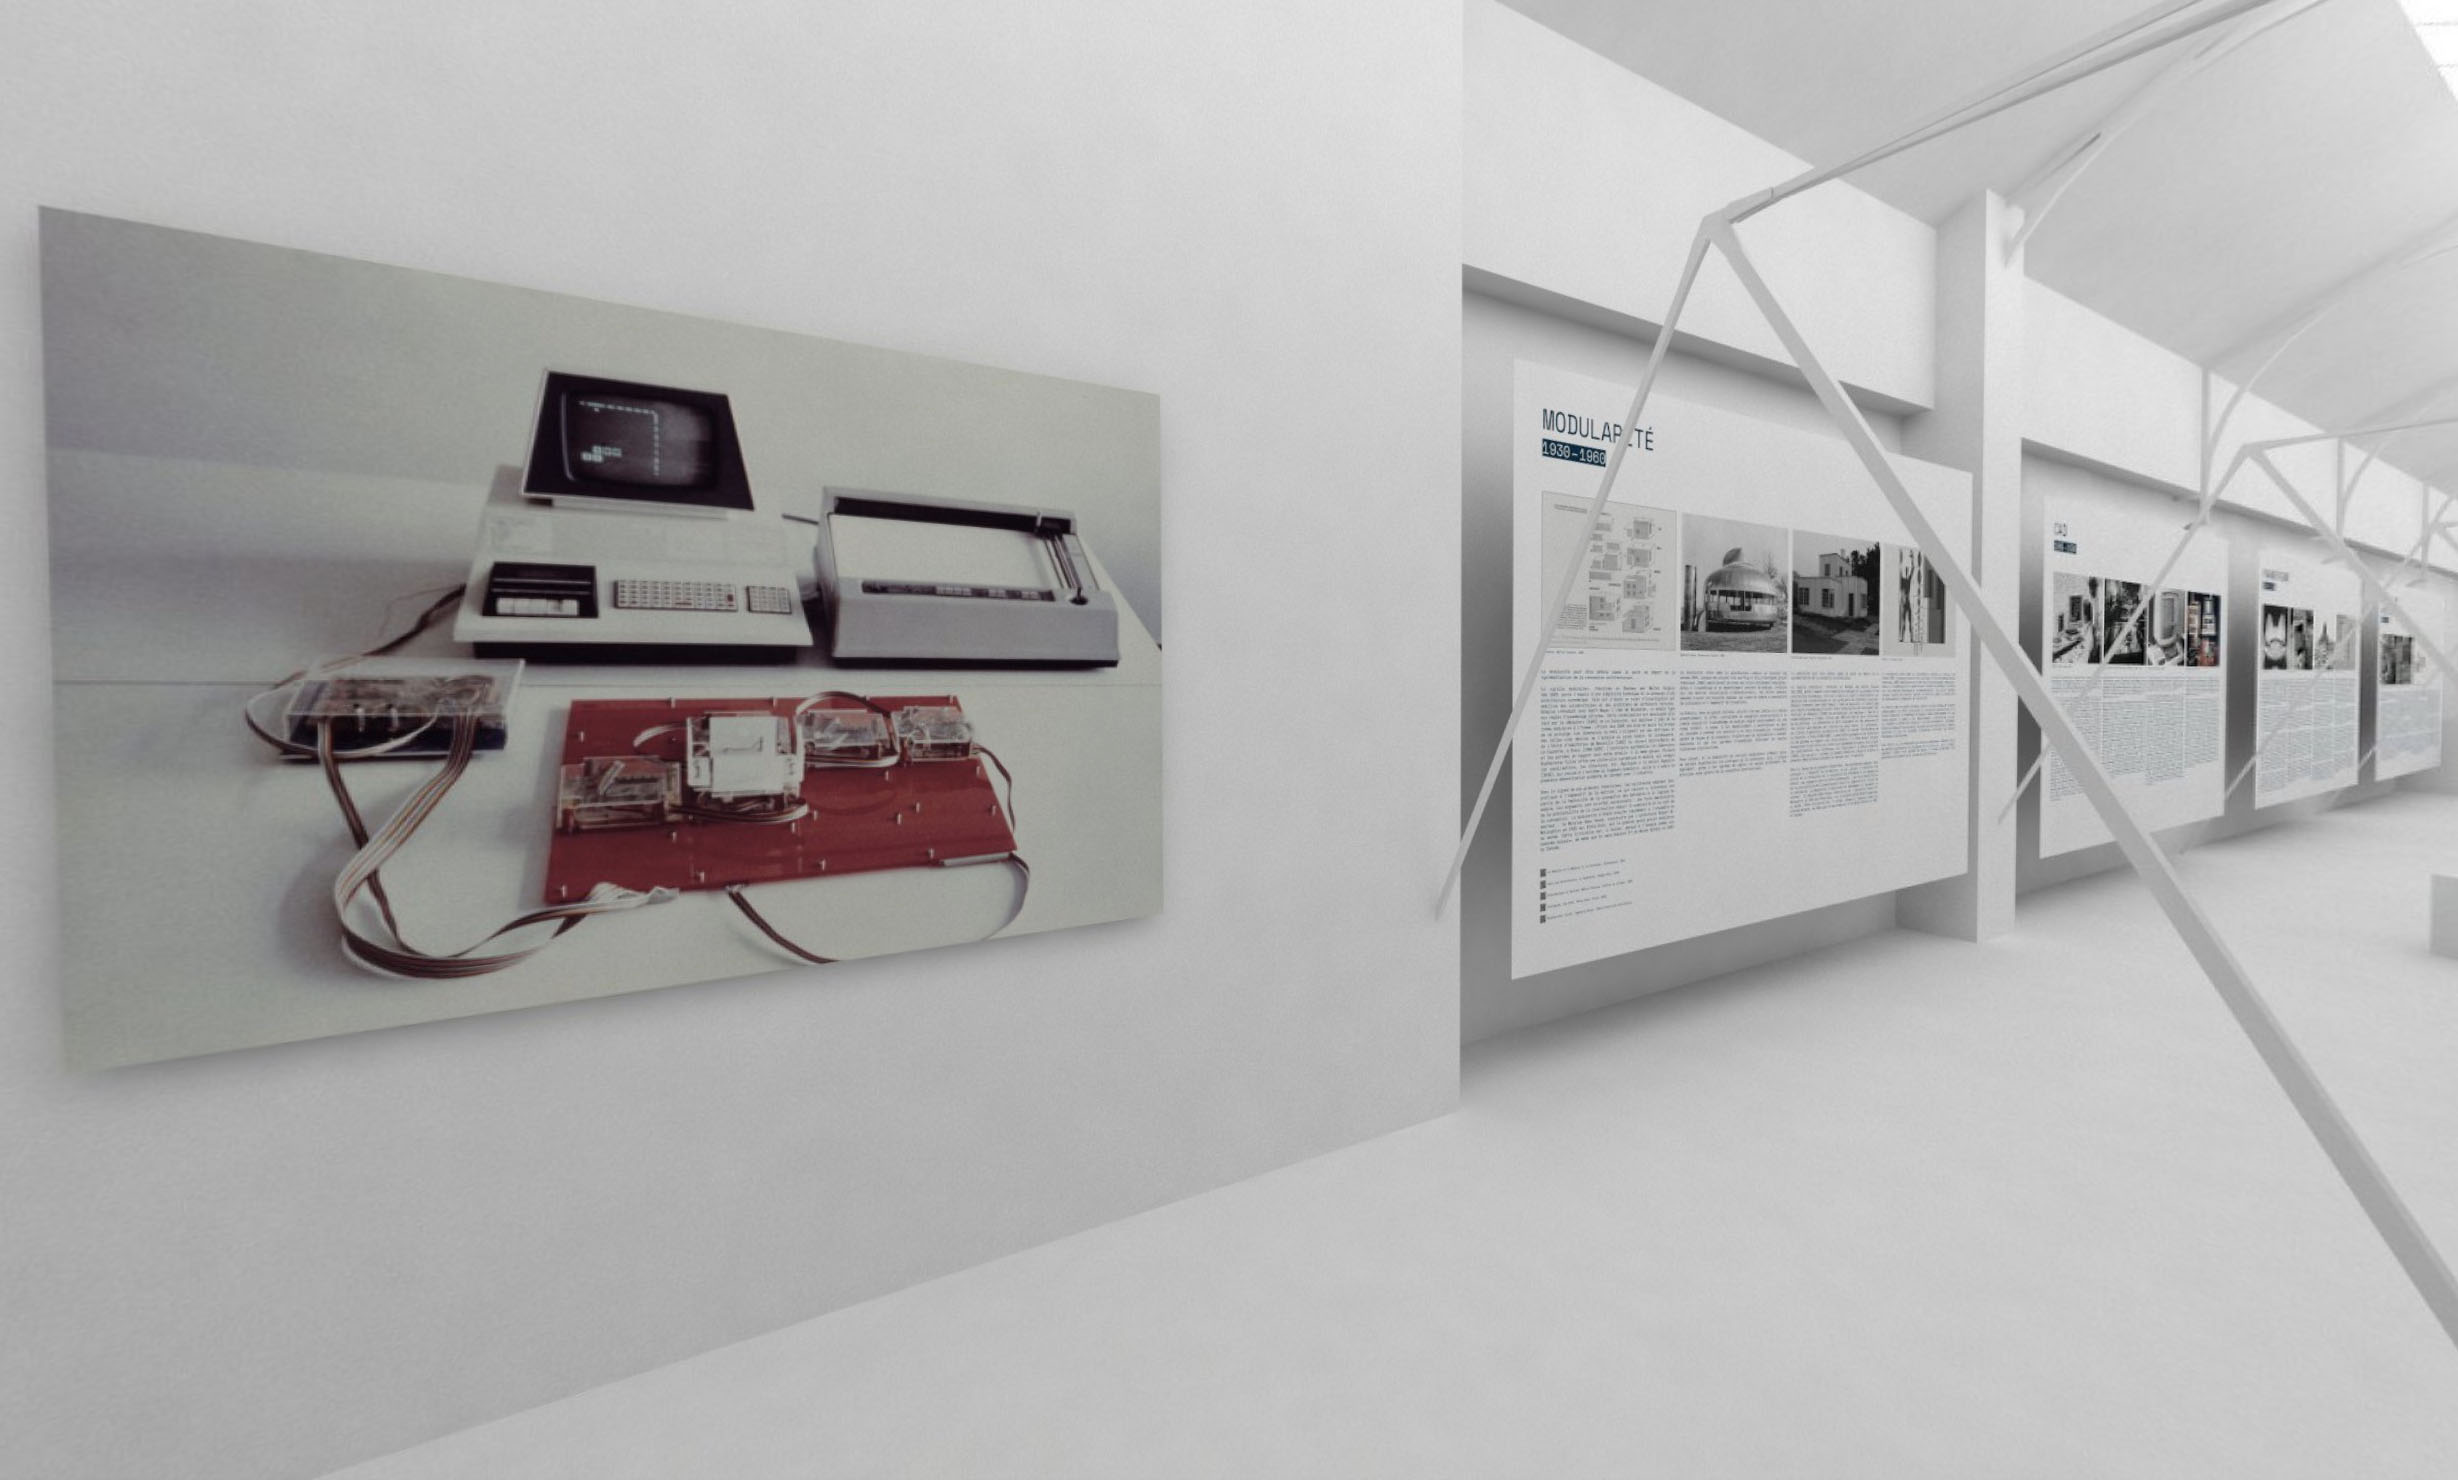 all-white interior with images and text on the wall, part of Artificial Intelligence & Architecture